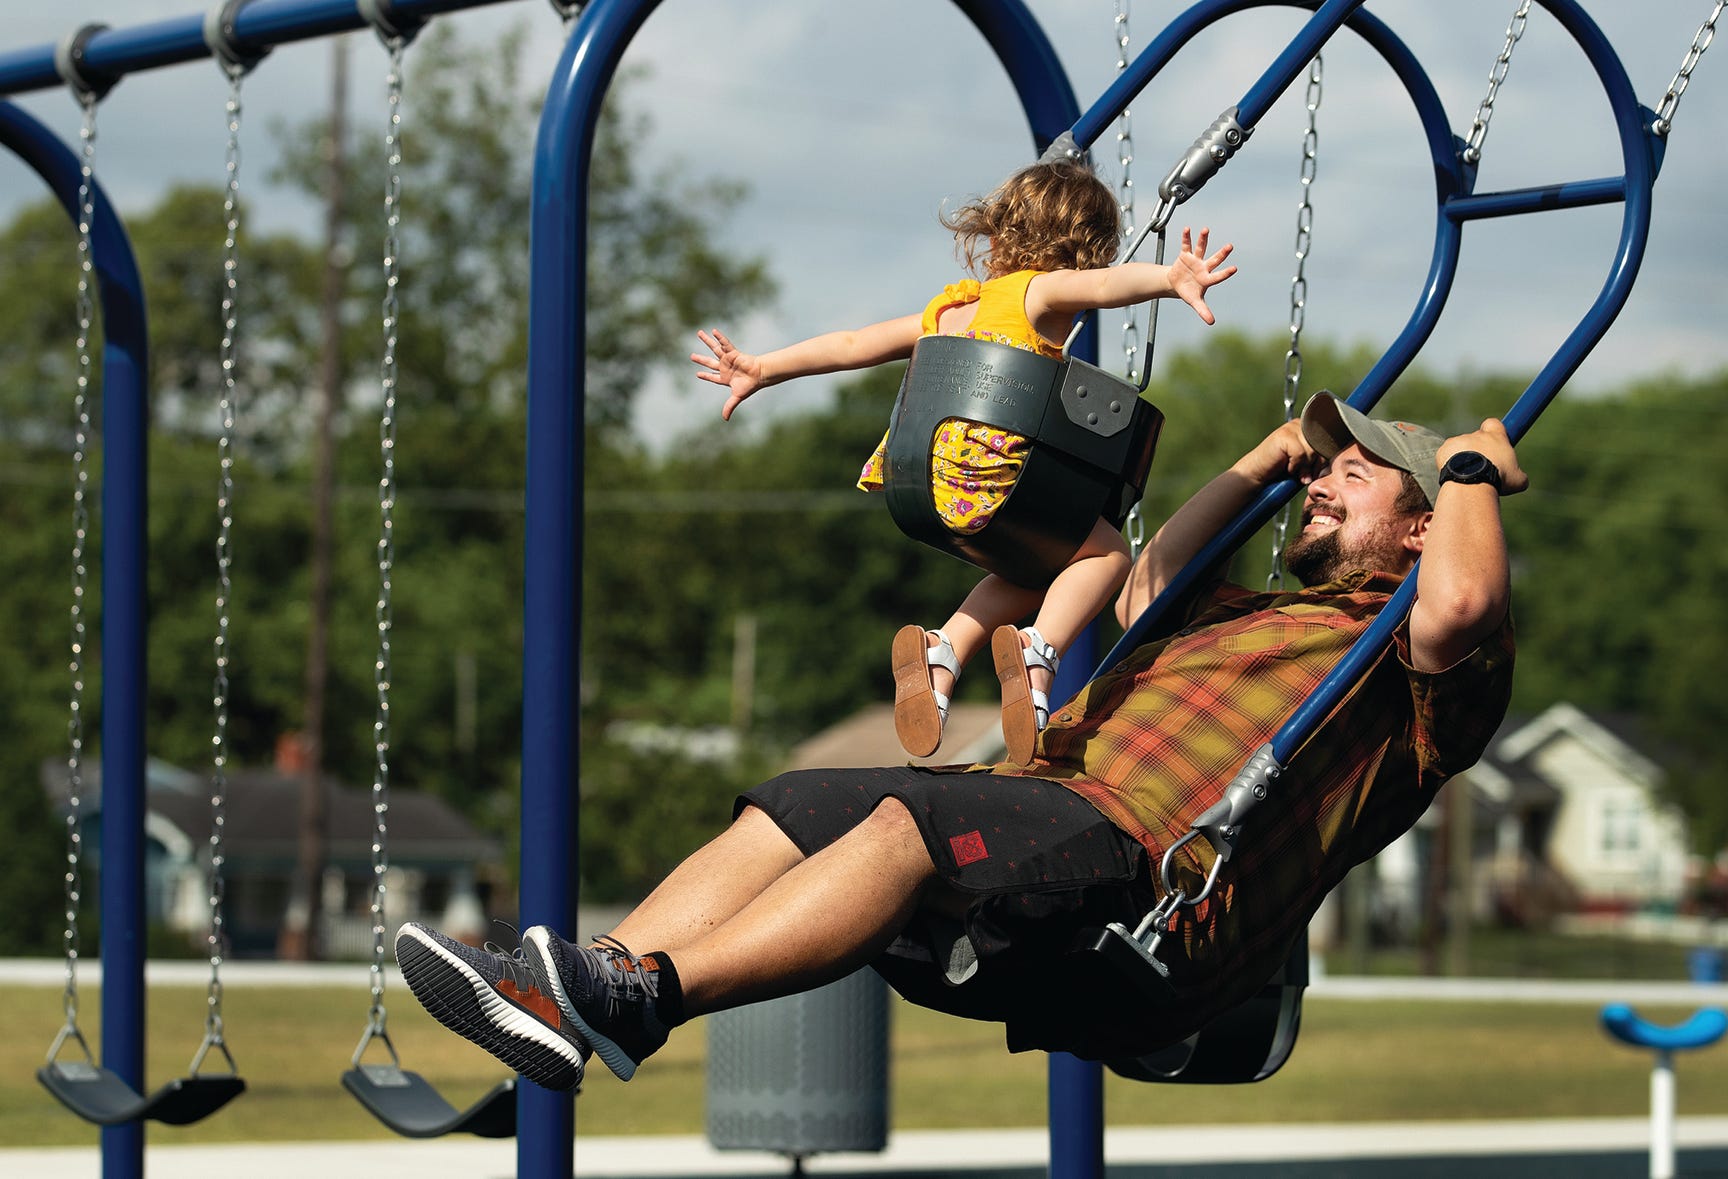 Father and child swinging while facing each other in opposing swings